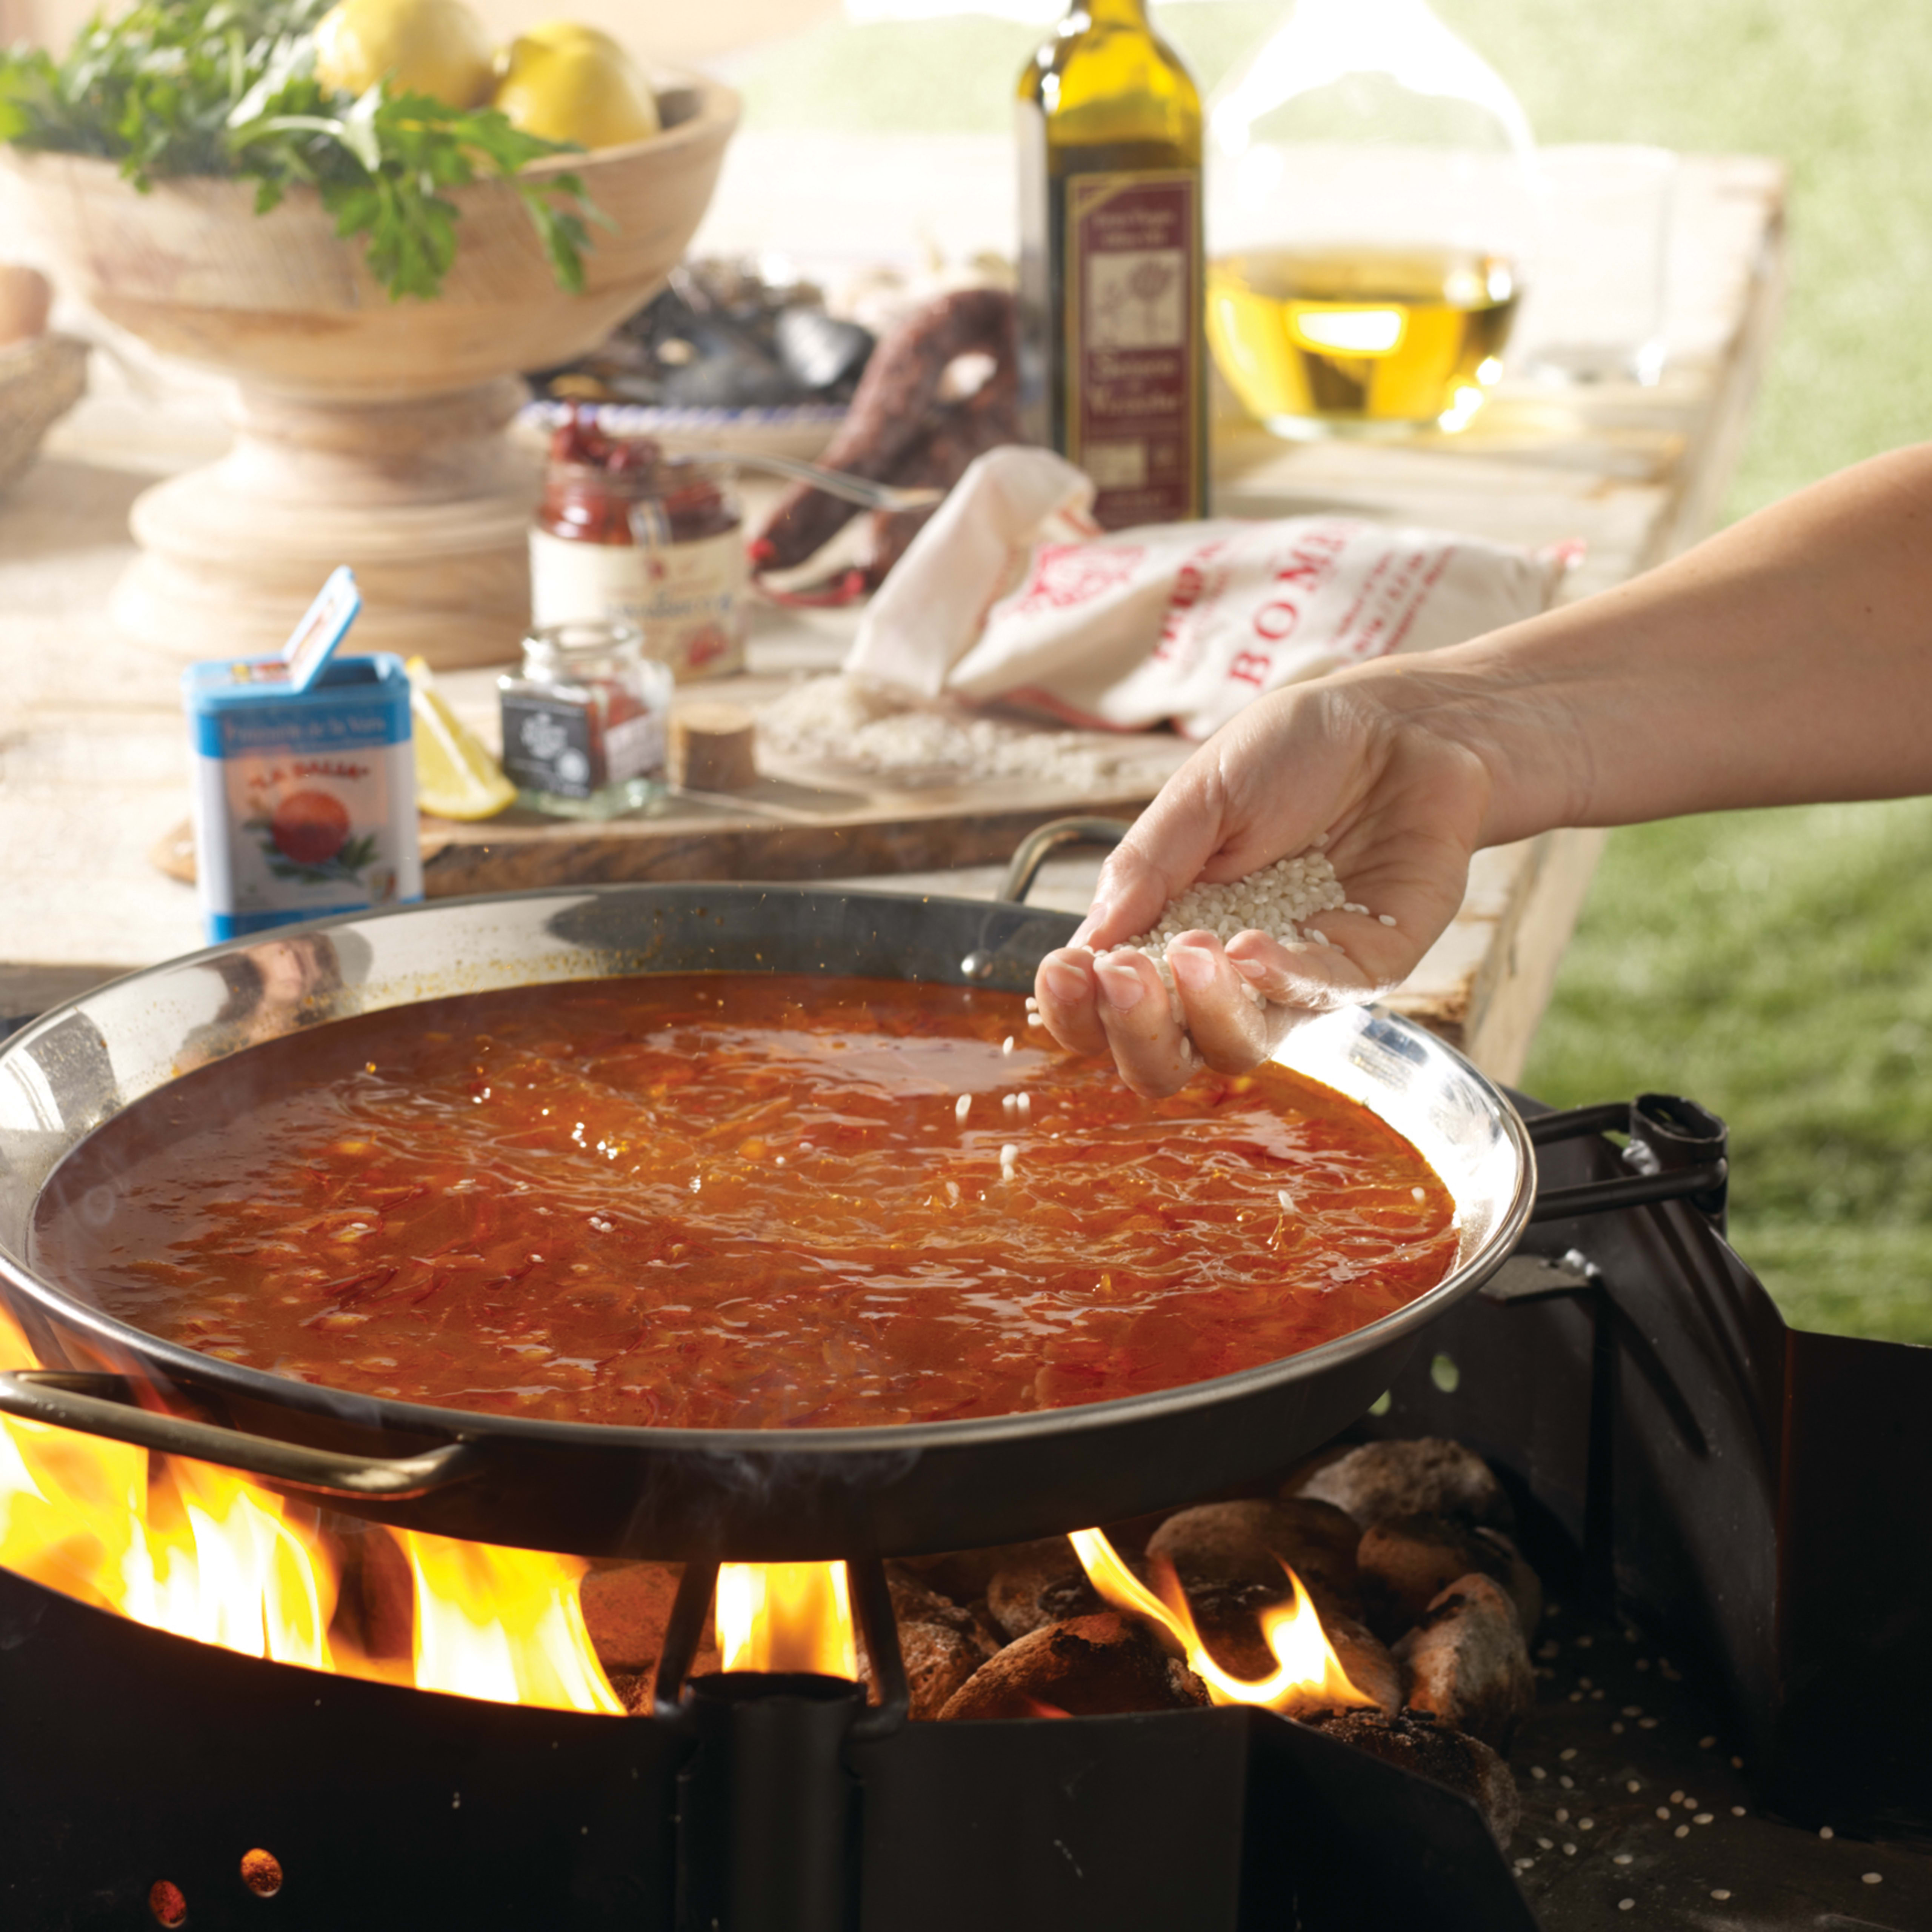 https://res.cloudinary.com/tienda-com/image/upload/f_auto/q_auto/c_fill,w_2560/dpr_2.0/v1/learn-about-spain/product-stories-paella-pan